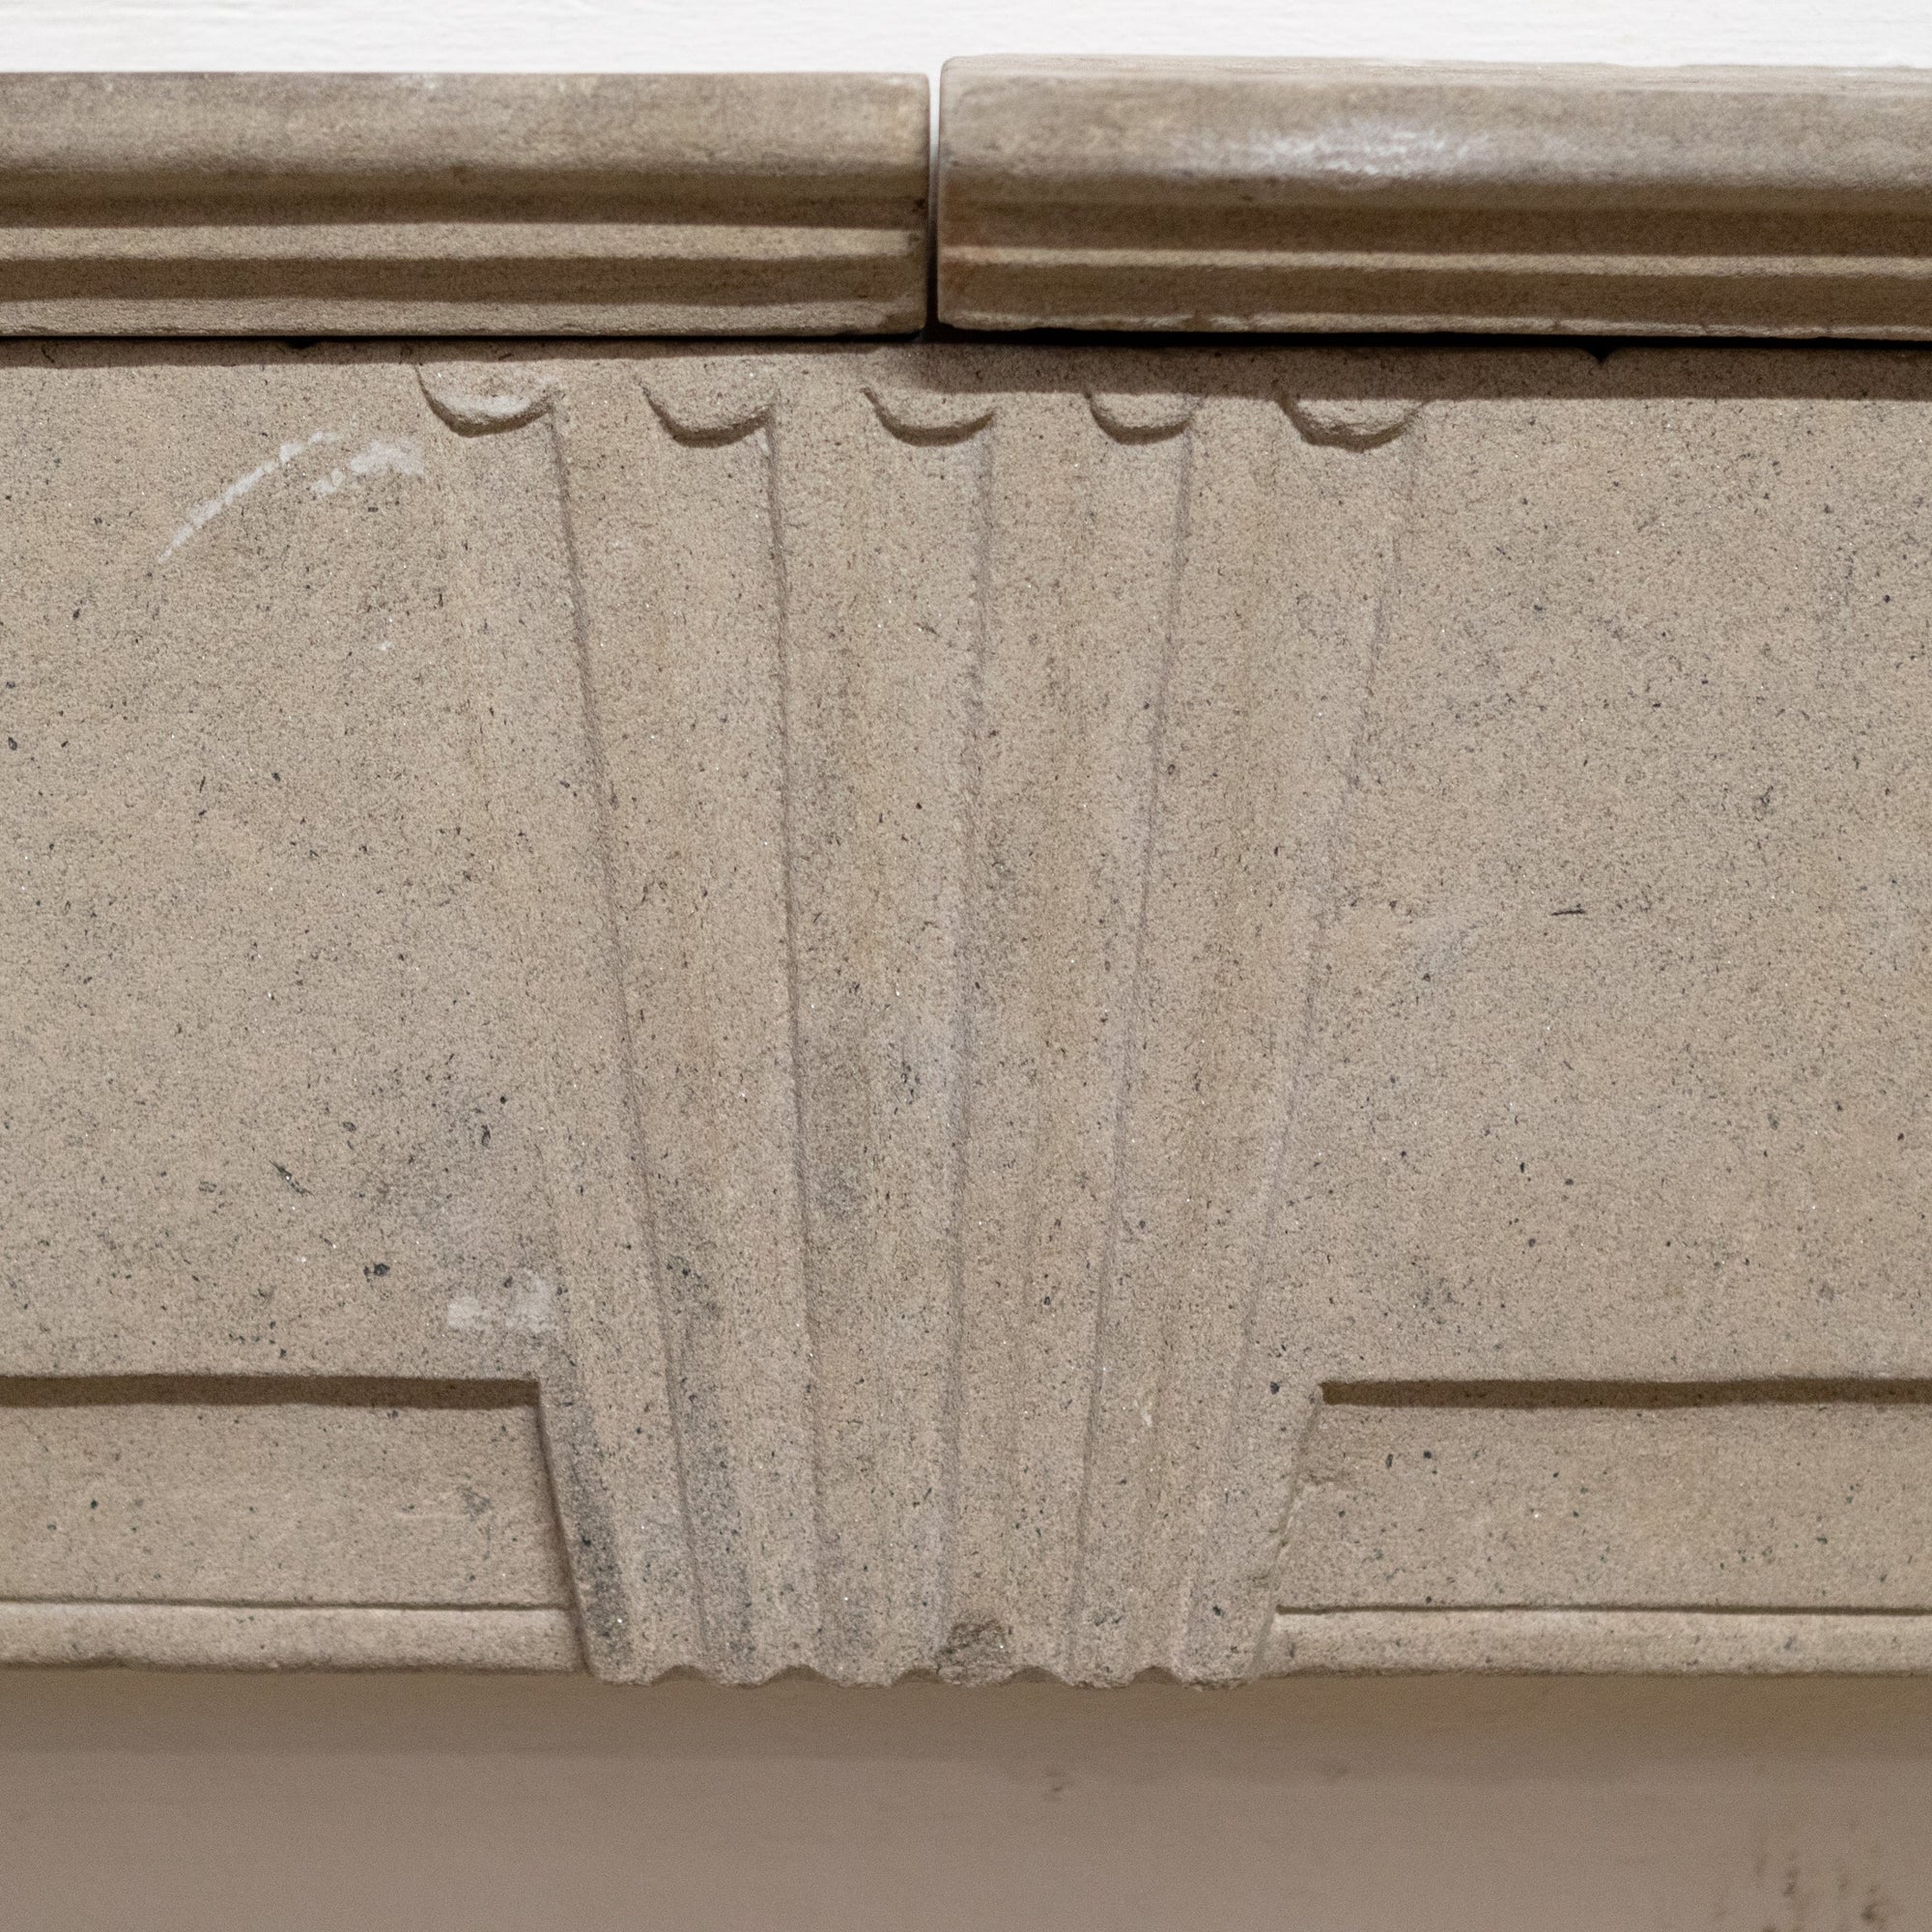 Rare Antique Queen Anne Stone Fireplace Surround | The Architectural Forum